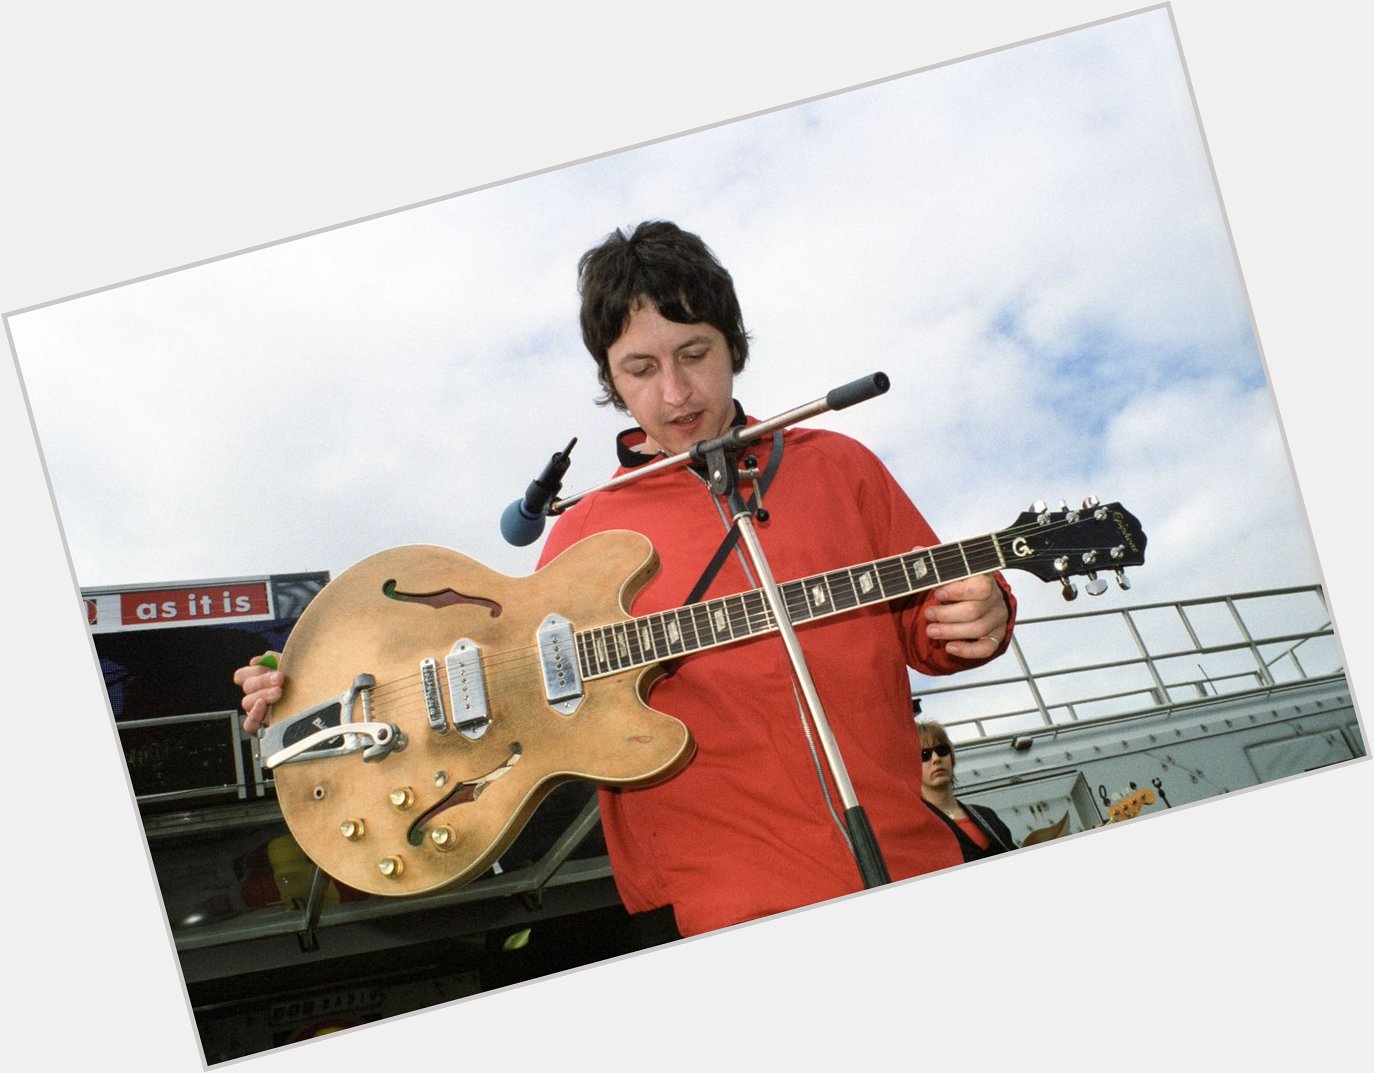 Happy Birthday Gem Archer - one of the best guitarist Oasis ever had 